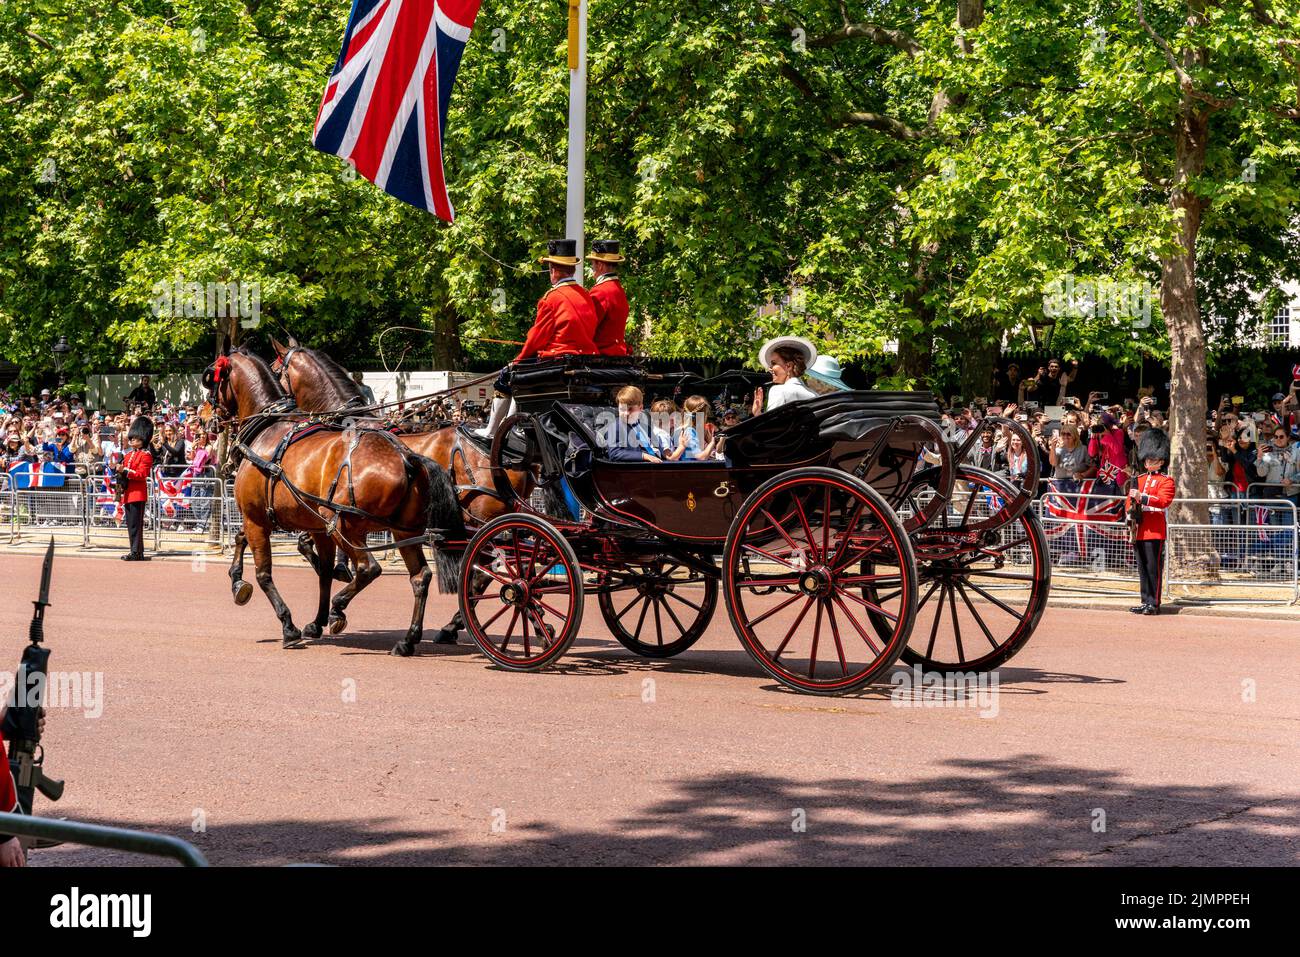 Members Of The British Royal Family Return Along The Mall In A Horse Drawn Carriage After Attending The Trooping The Colour Ceremony, London, UK. Stock Photo